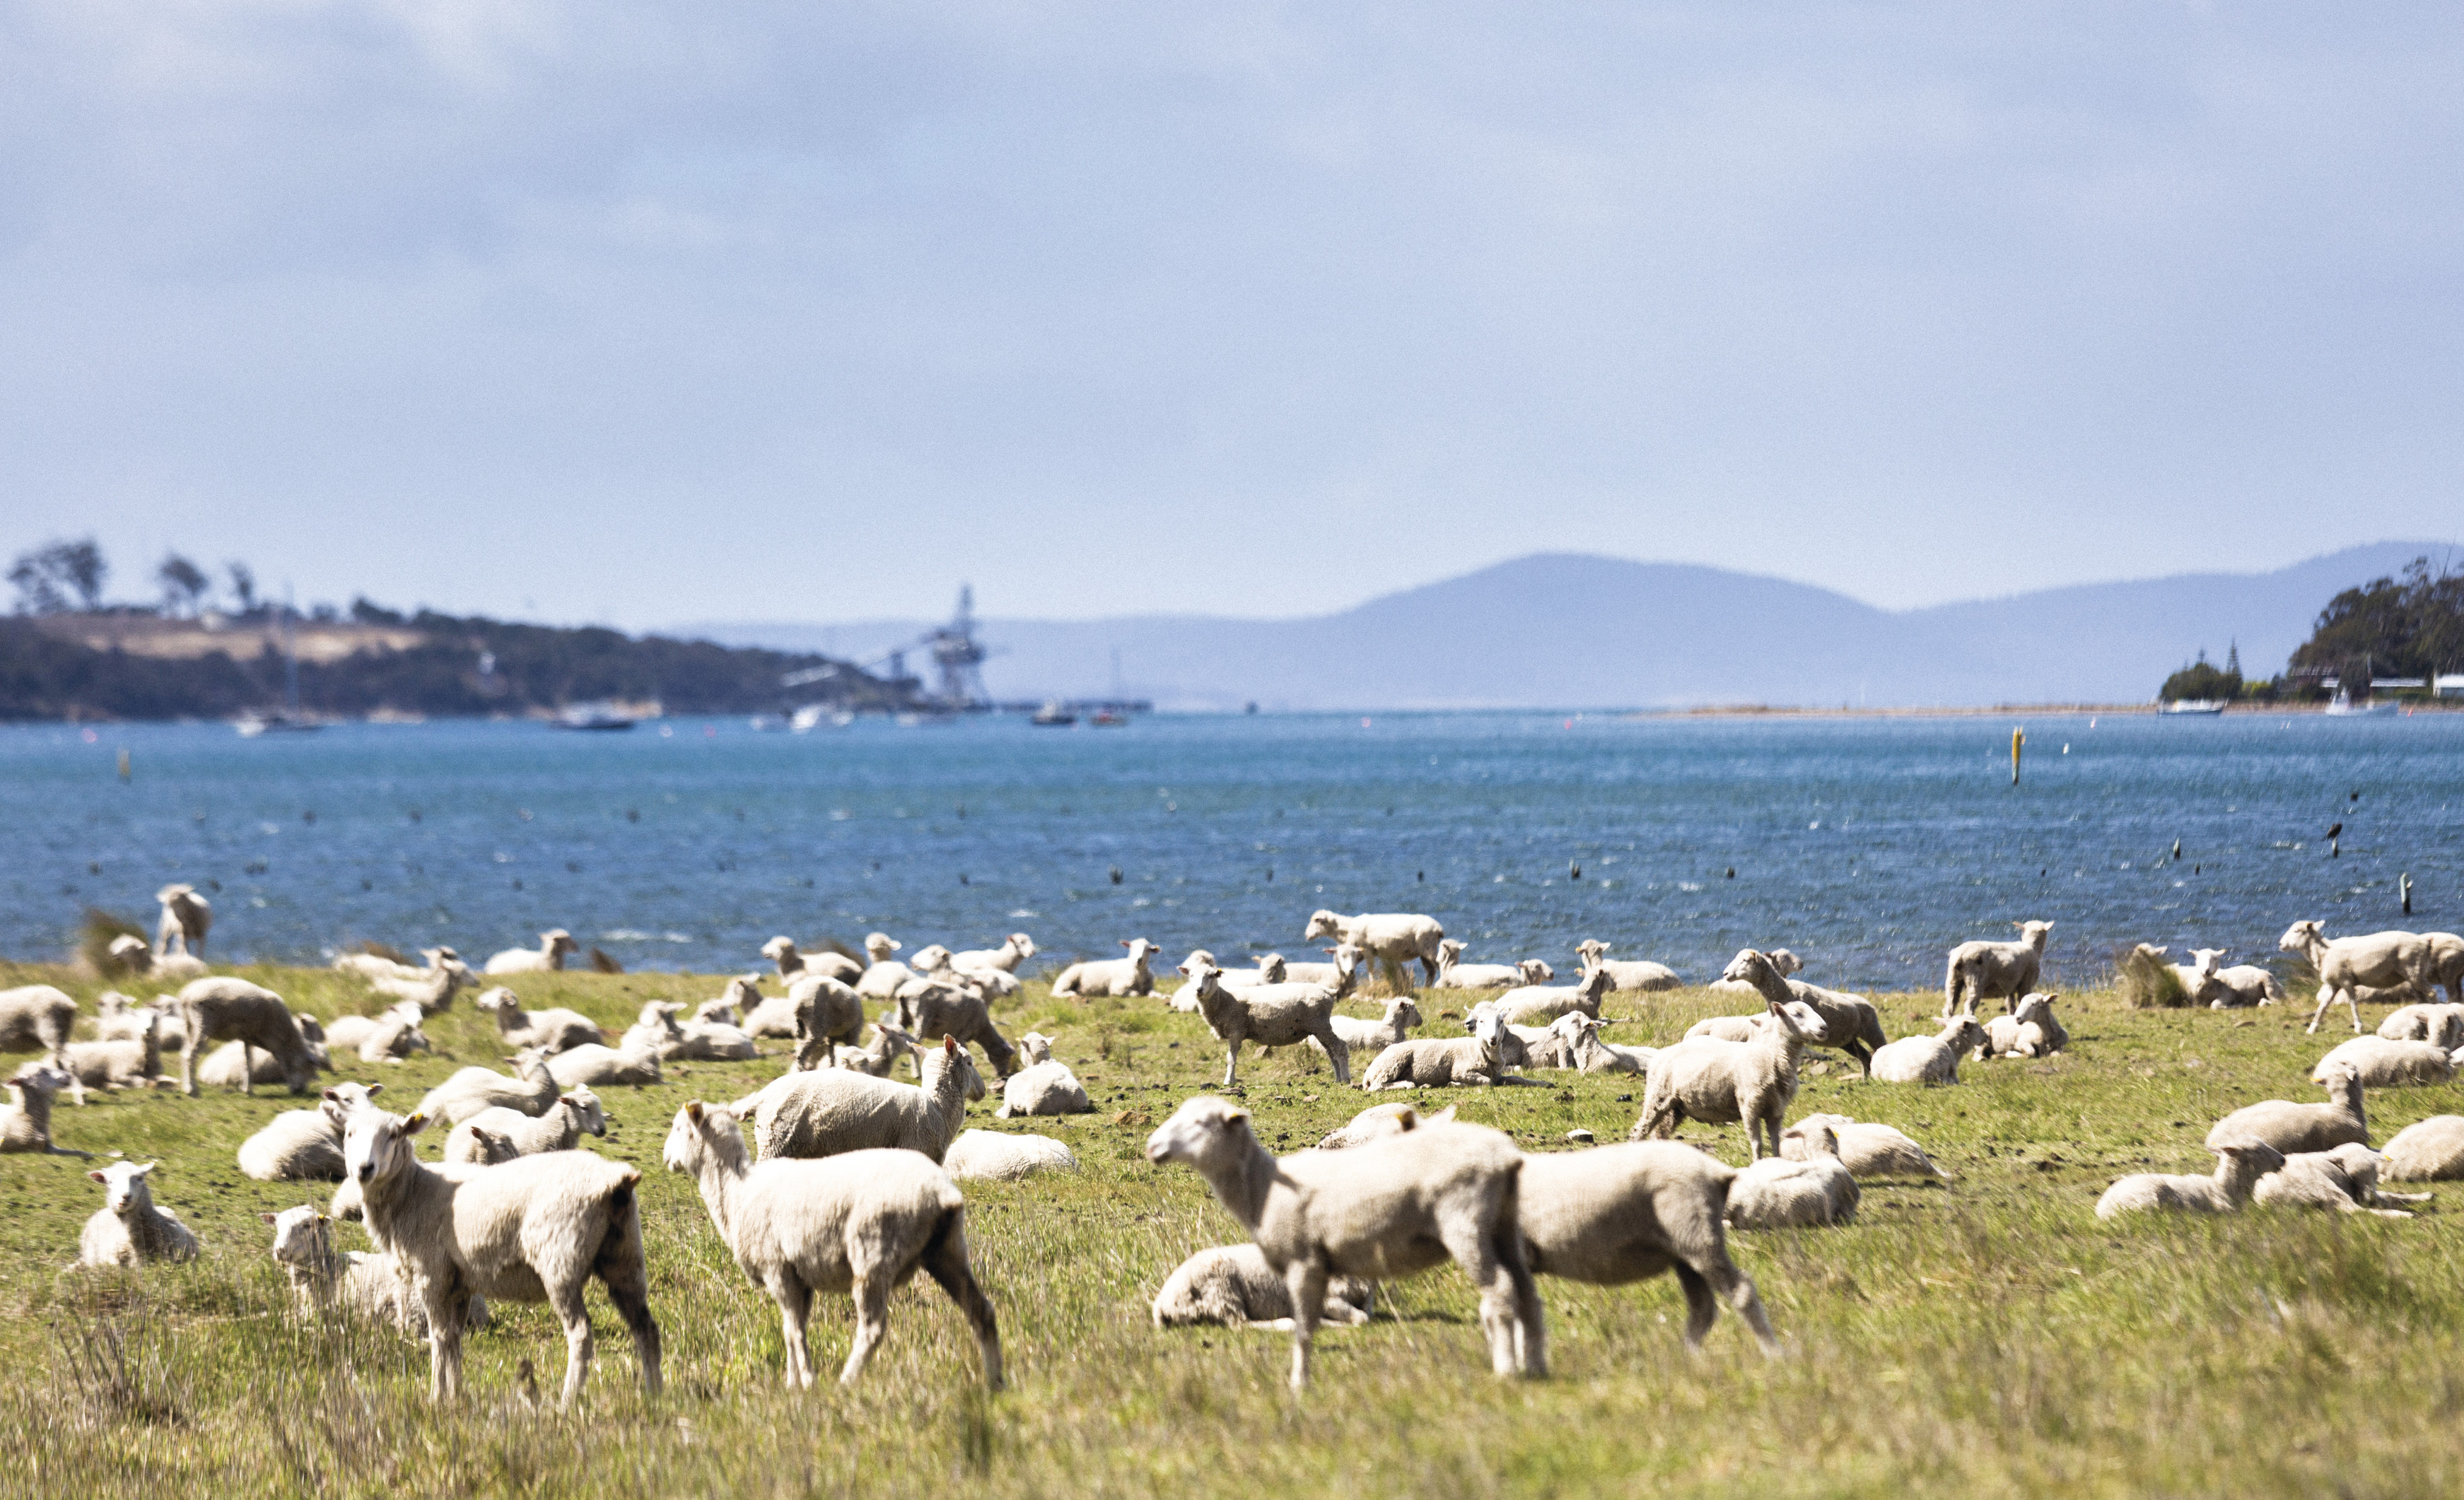 Lots of sheeps graze at Triabunna, the scenic port-side town.